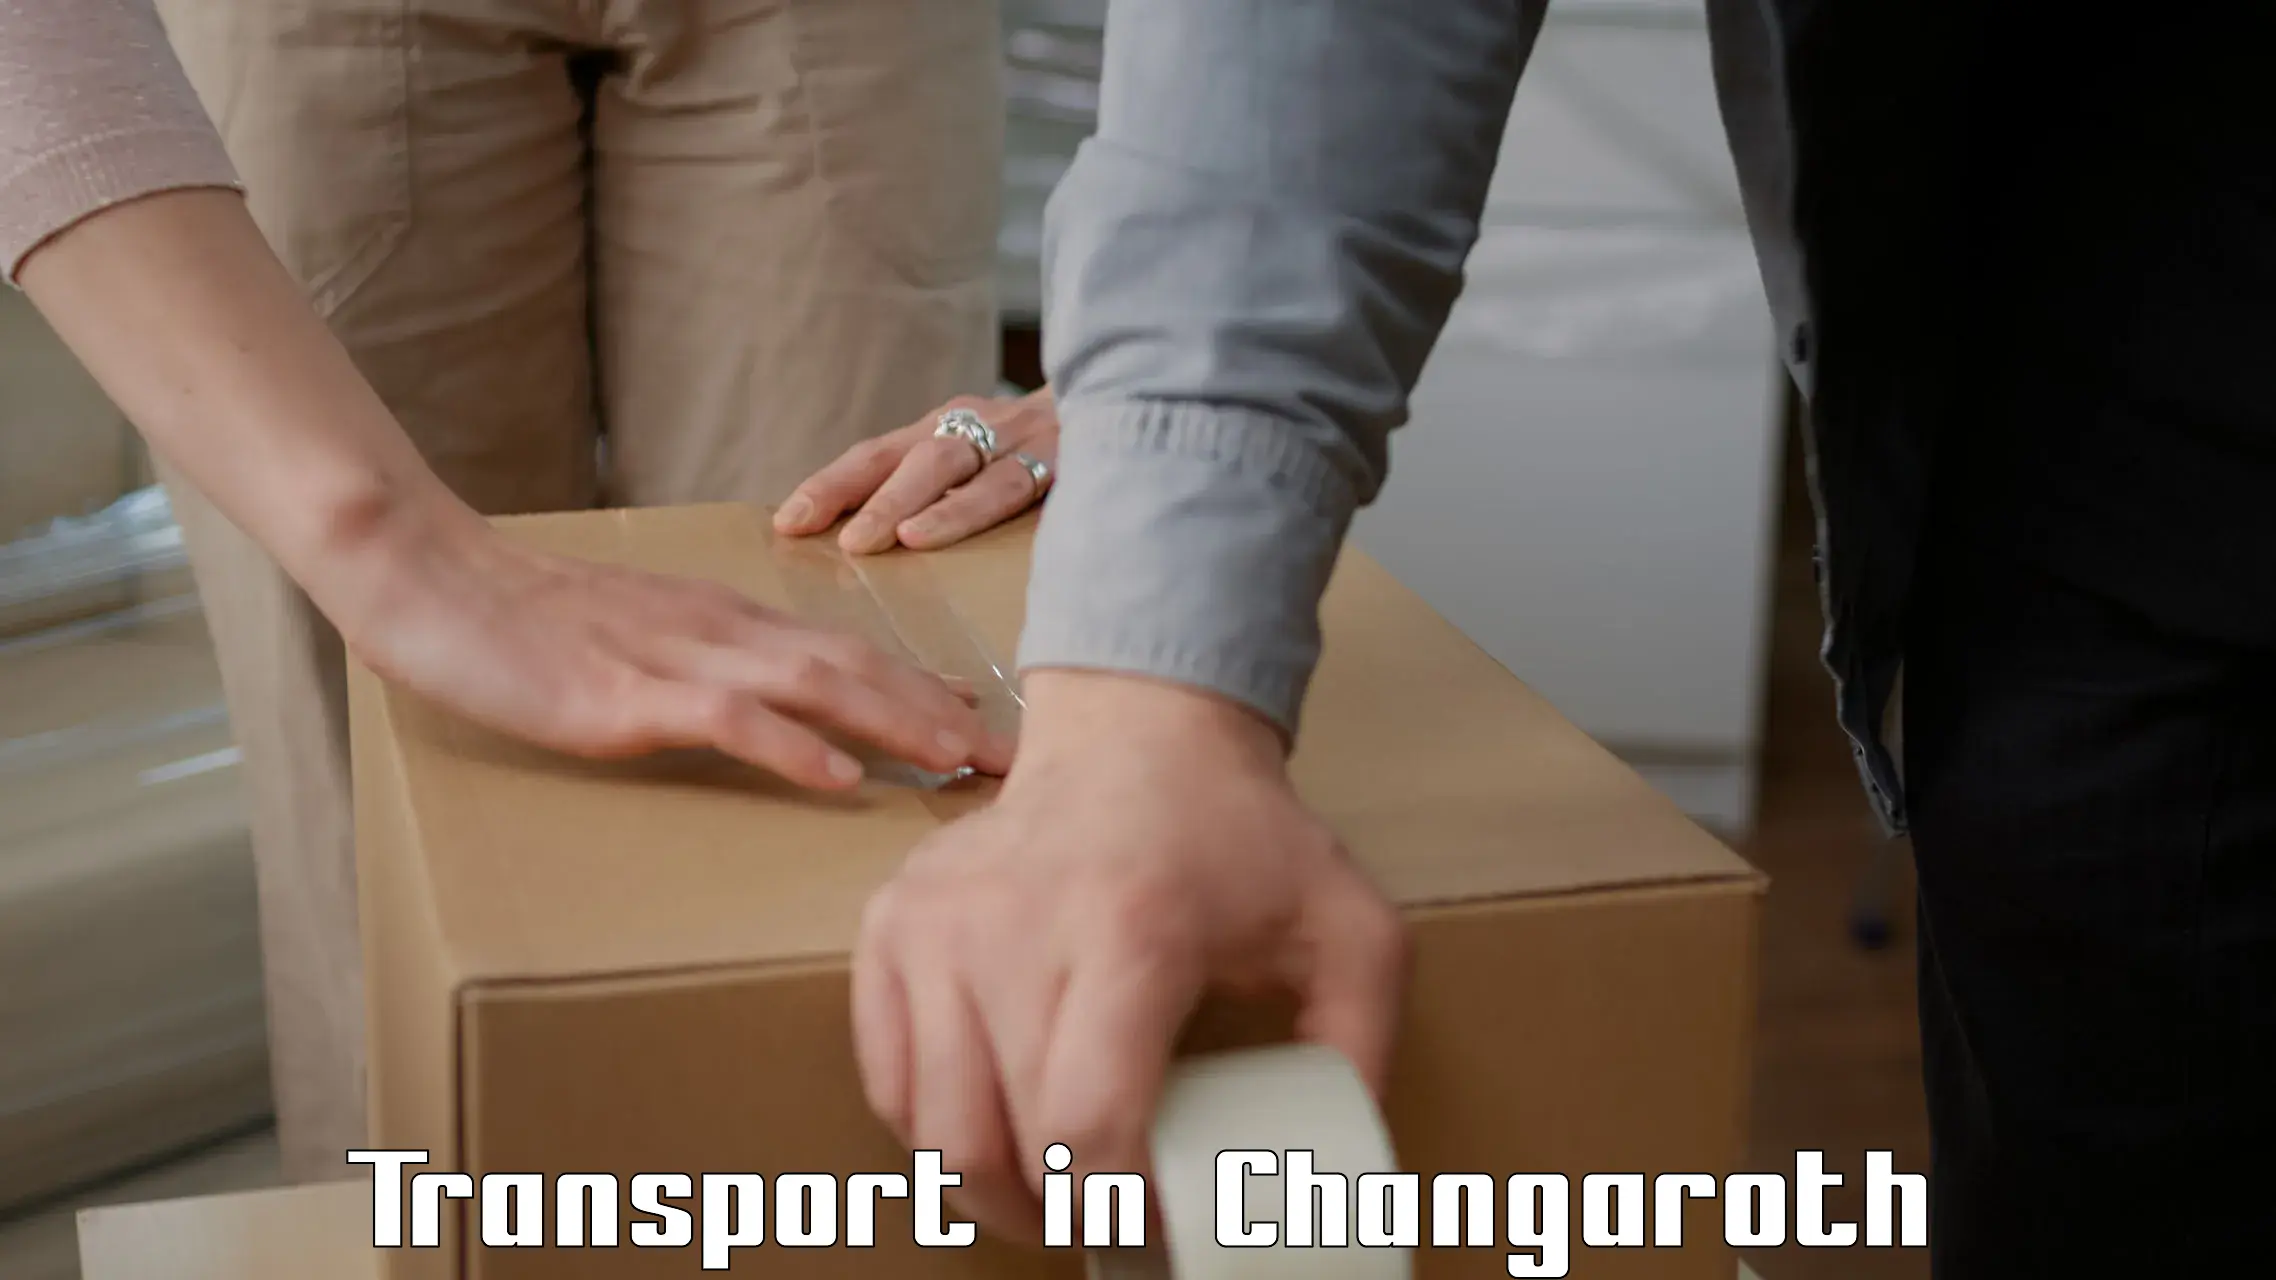 Pick up transport service in Changaroth